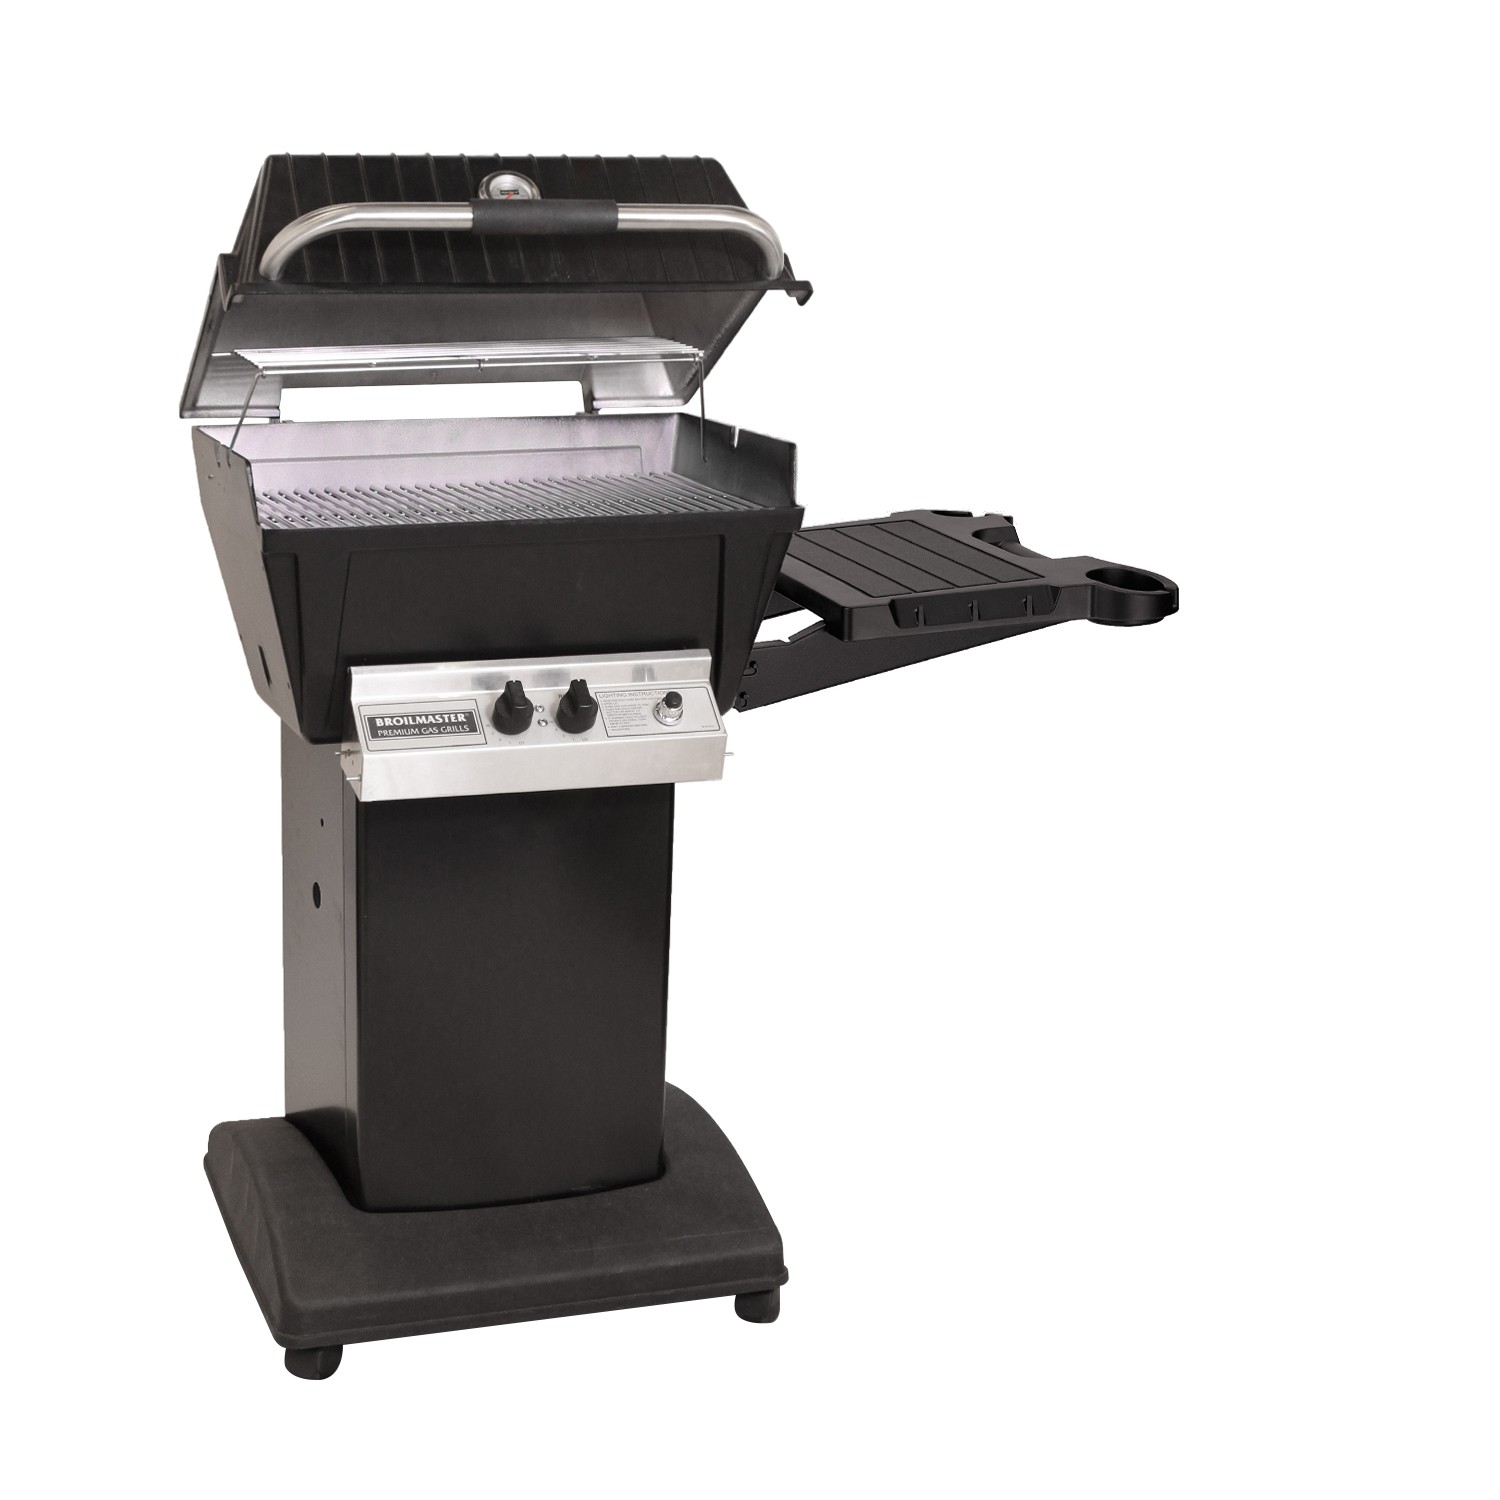 BROILMASTER H4X DELUXE SERIES PROPANE GAS GRILL - BLACK